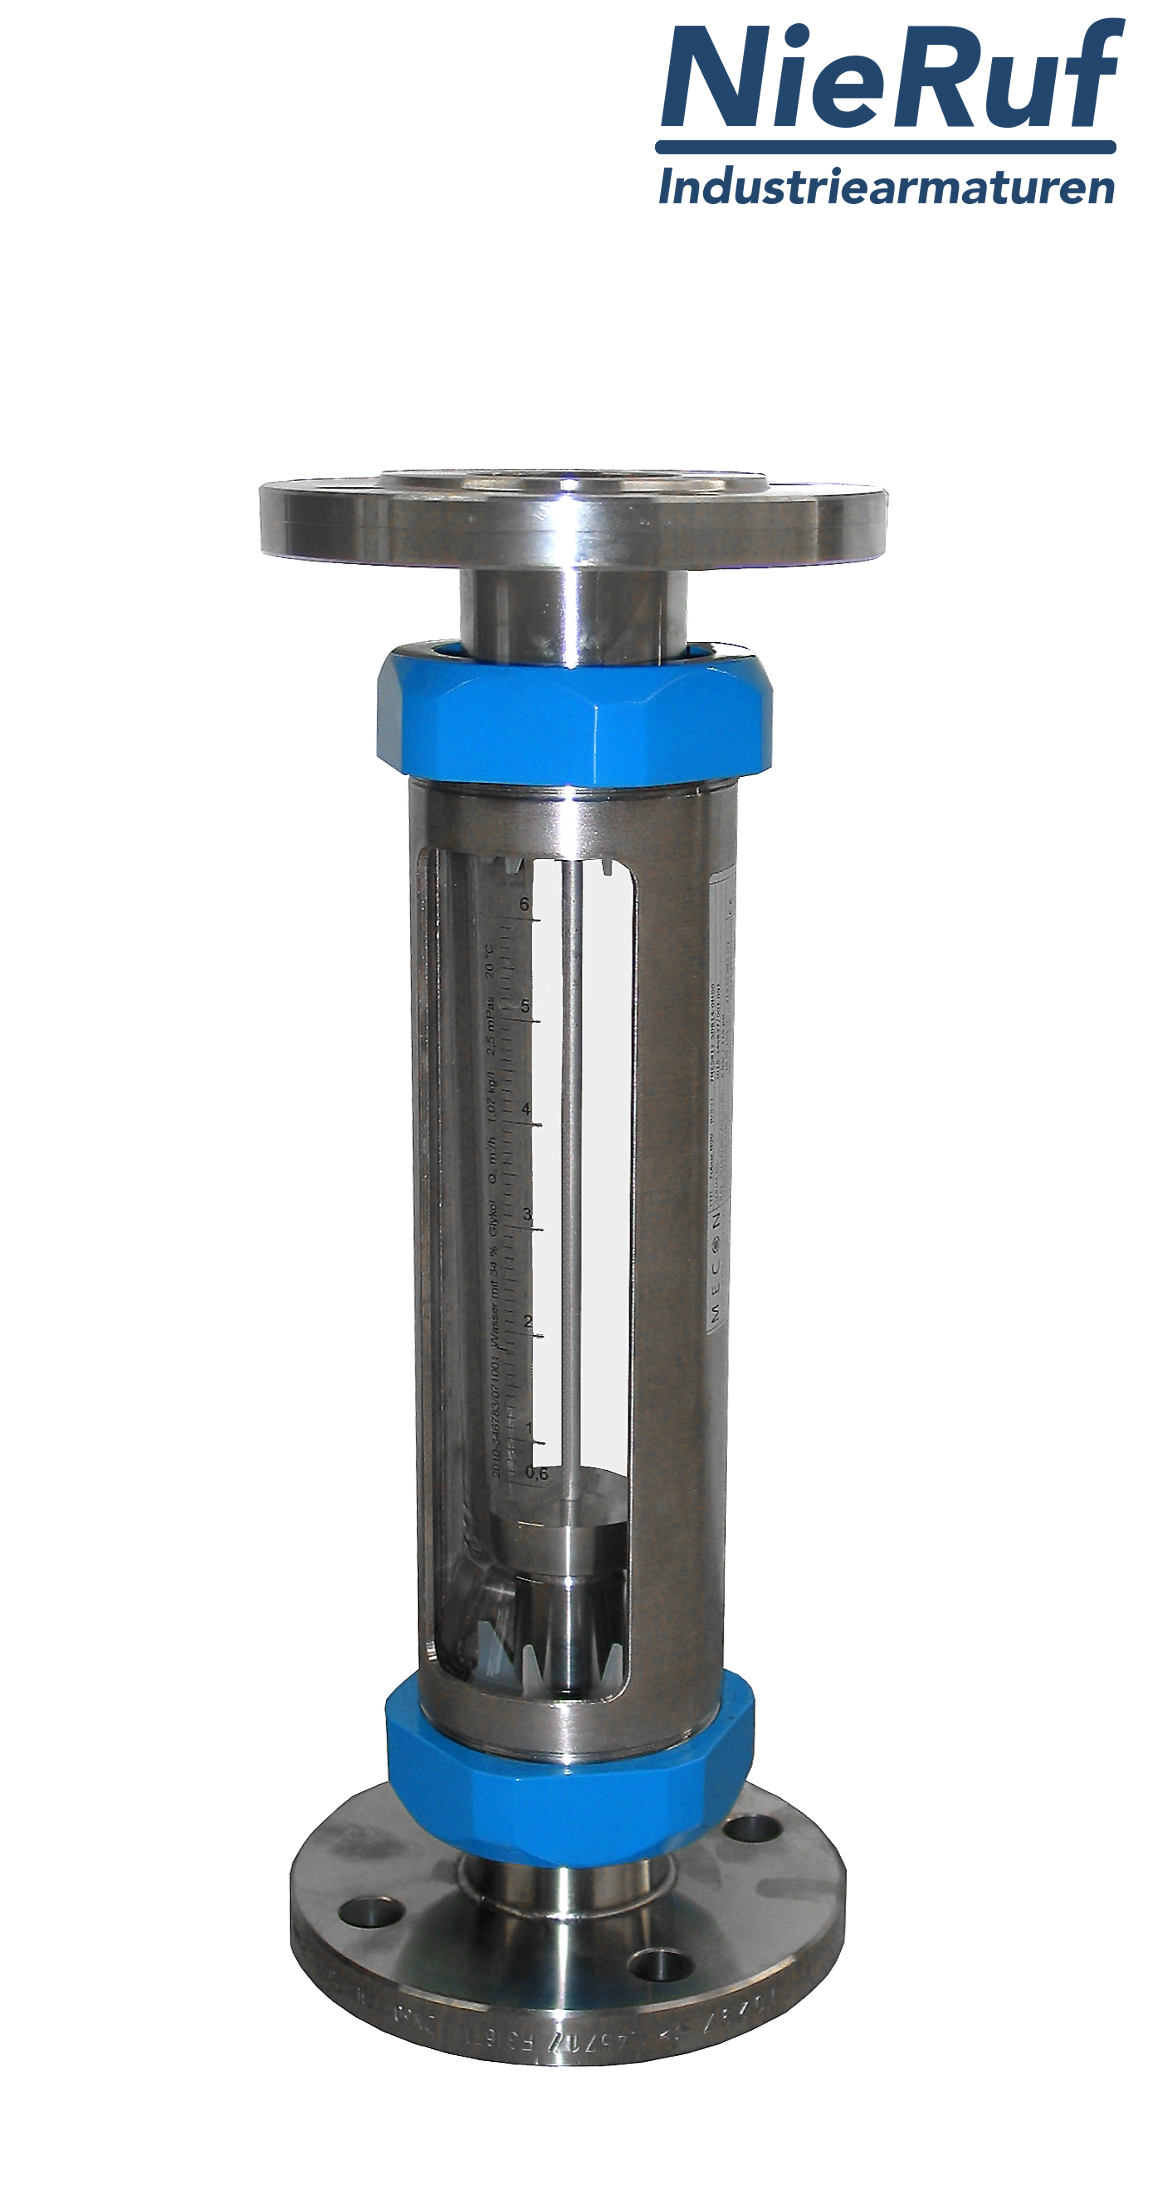 Variable area flowmeter stainless steel + borosilicate flange DN25 12.5 - 125.0 l/h water FKM